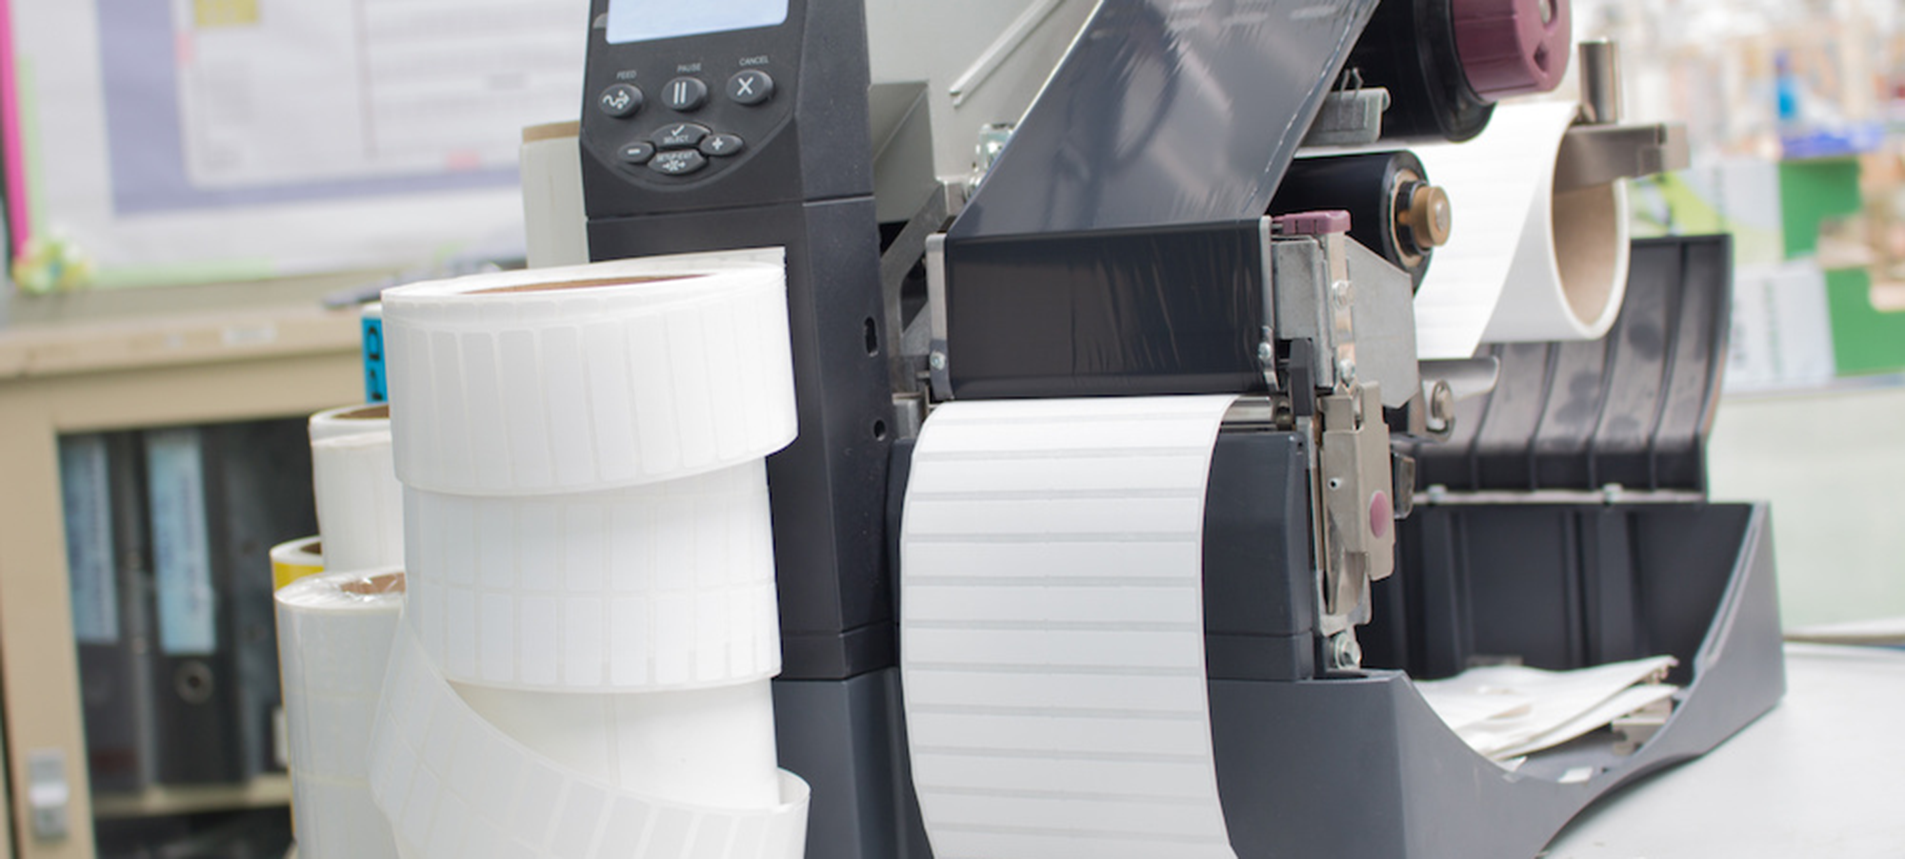 FlexPrint Managed Print Solutions